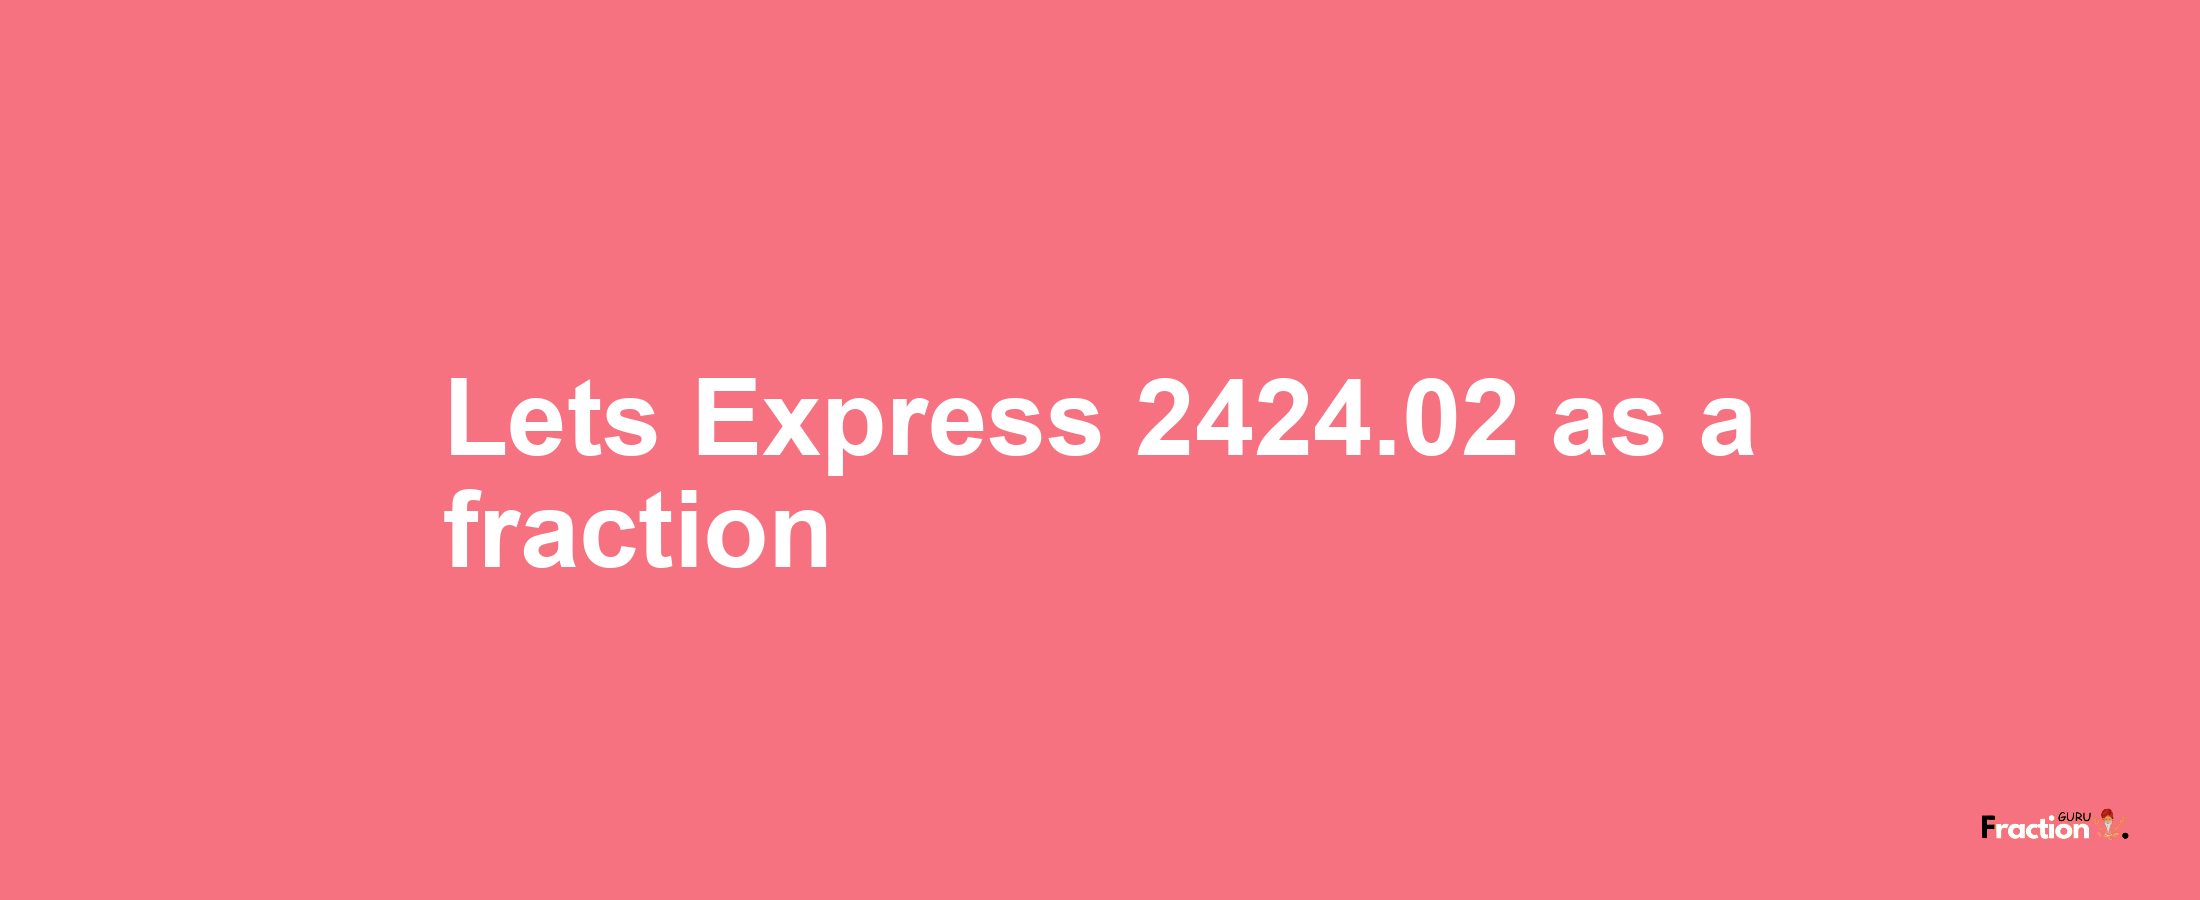 Lets Express 2424.02 as afraction